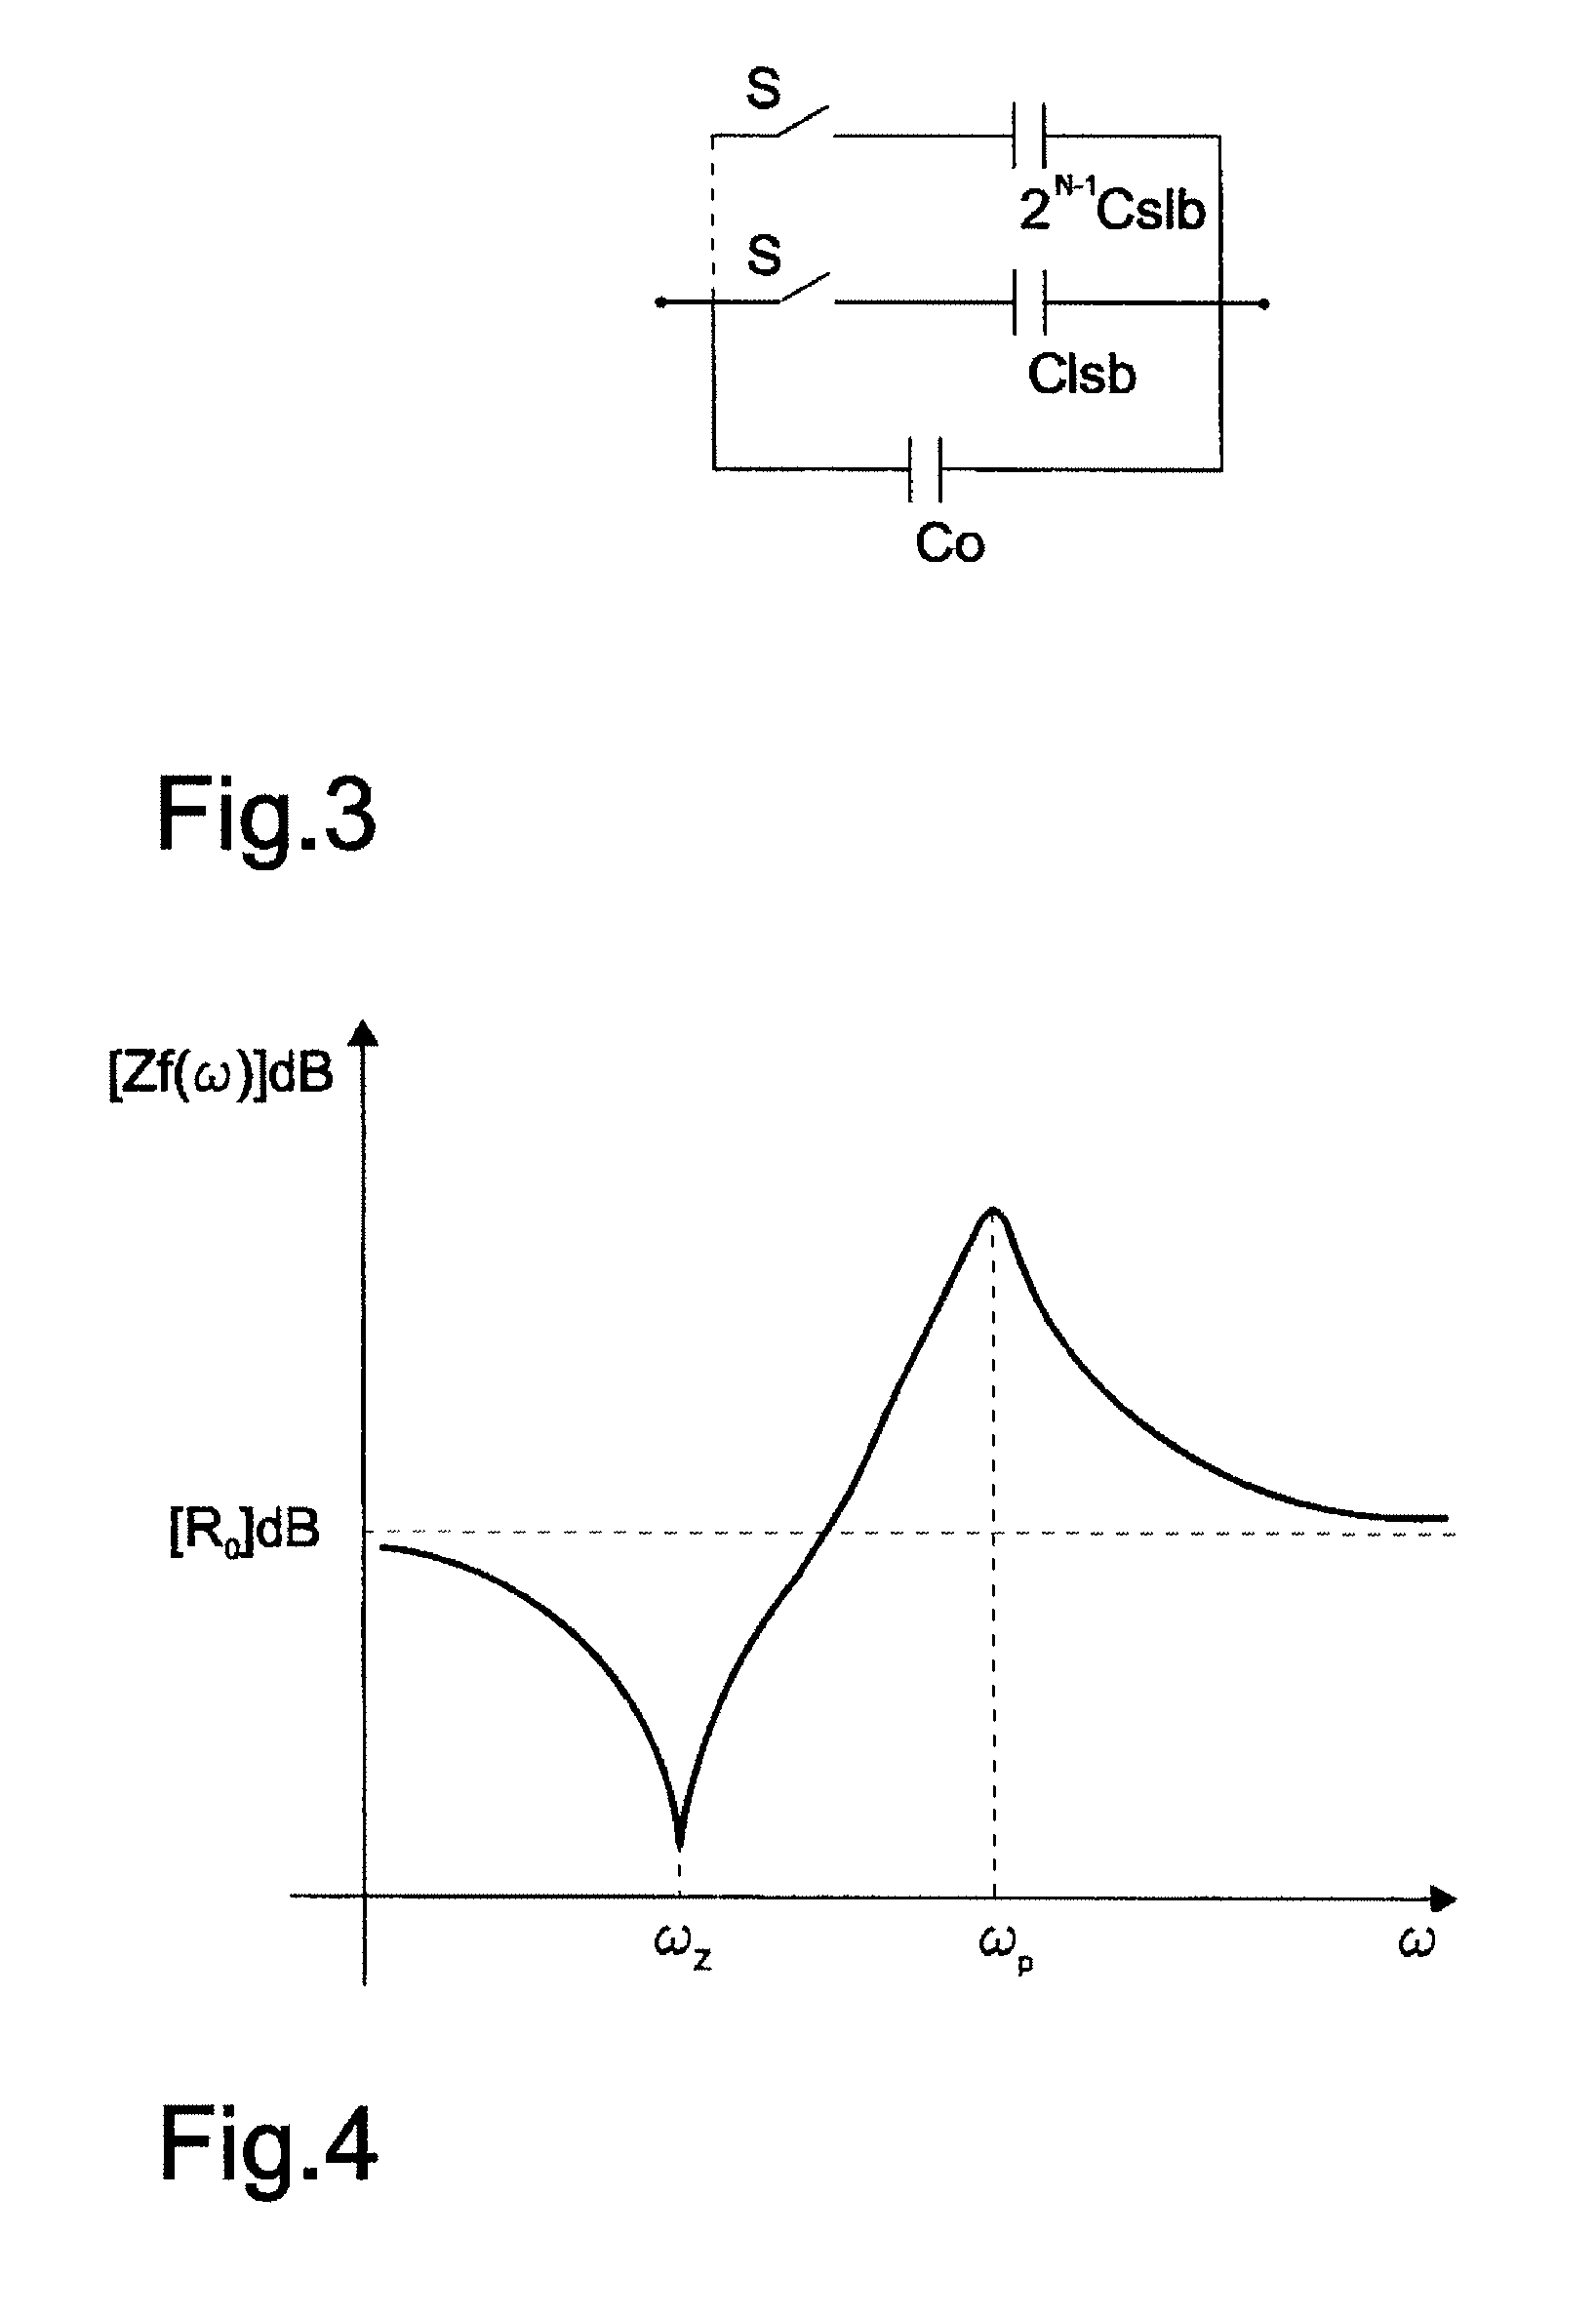 Notch filter and apparatus for receiving and transmitting radio-frequency signals incorporating same